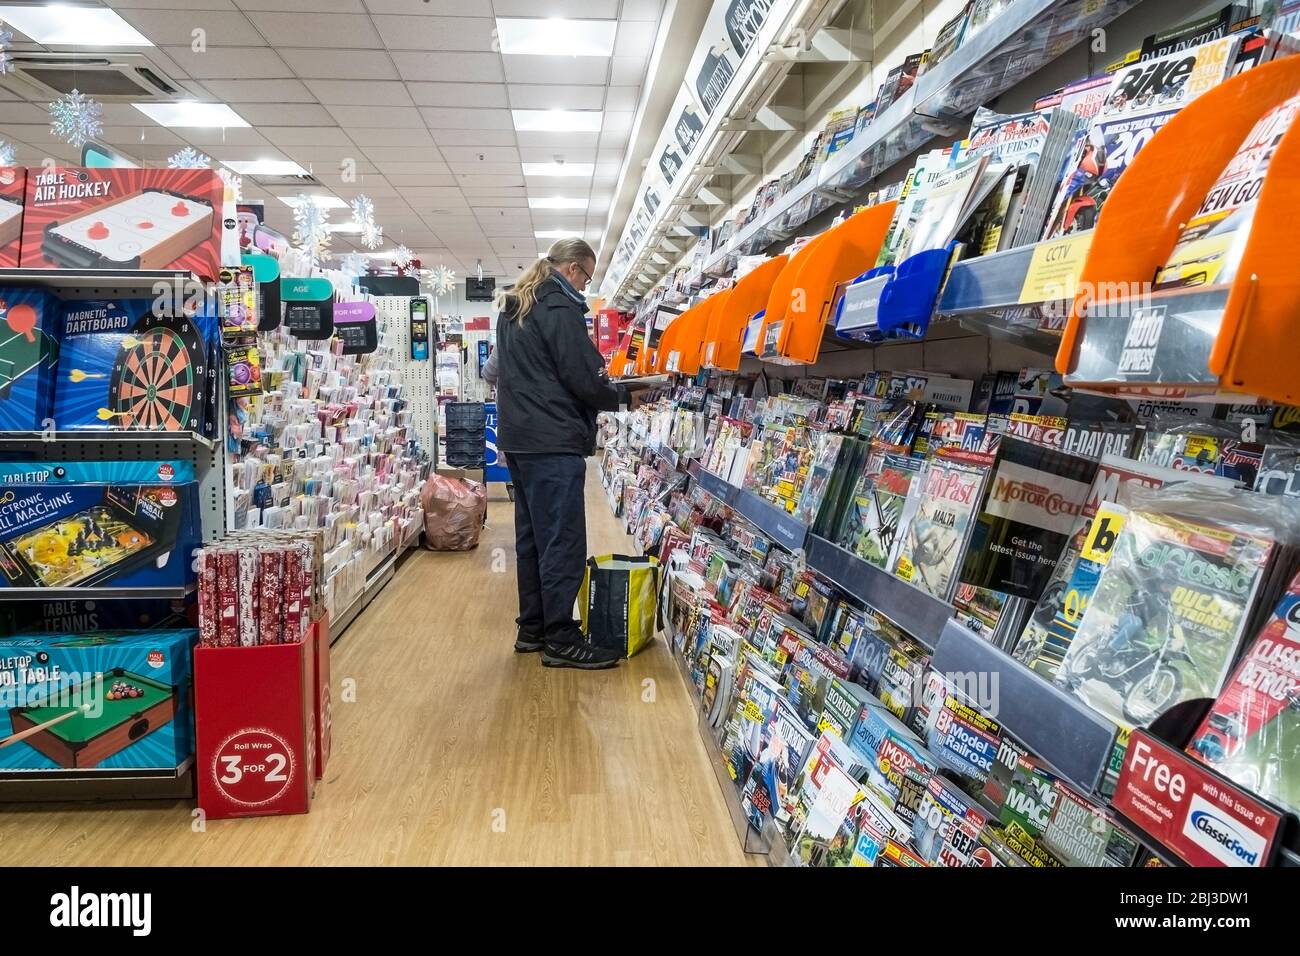 A customer shopper browsing through wide selection of magazines and periodicals on sale in a WH Smith shop store. Stock Photo